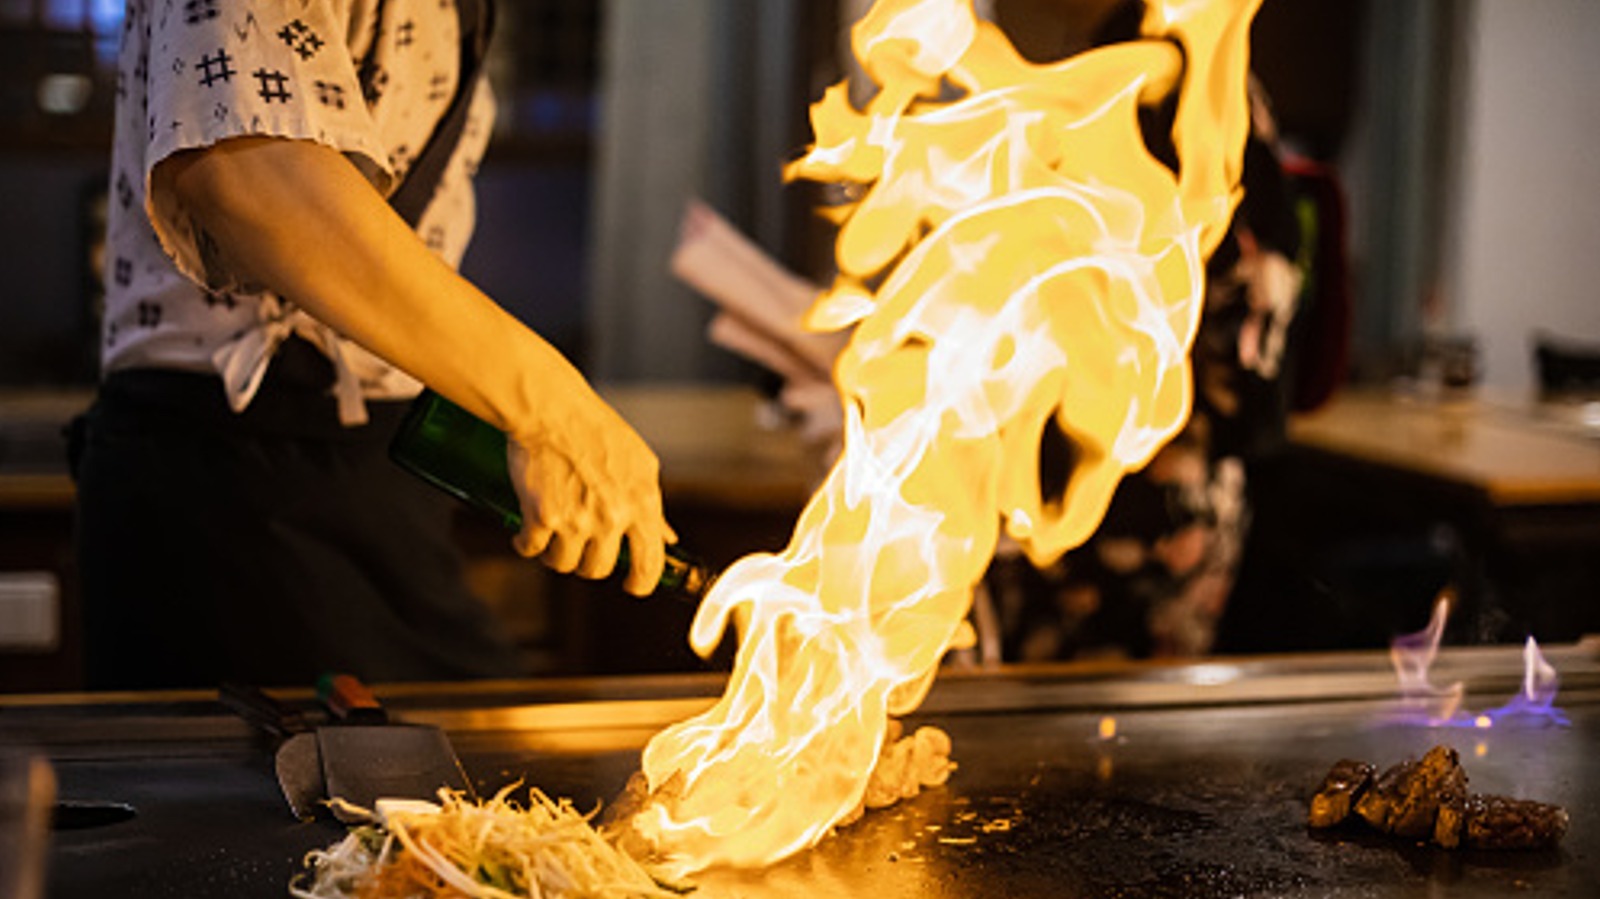 https://www.tastingtable.com/img/gallery/15-best-dishes-you-can-find-at-a-japanese-steakhouse/l-intro-1685367051.jpg